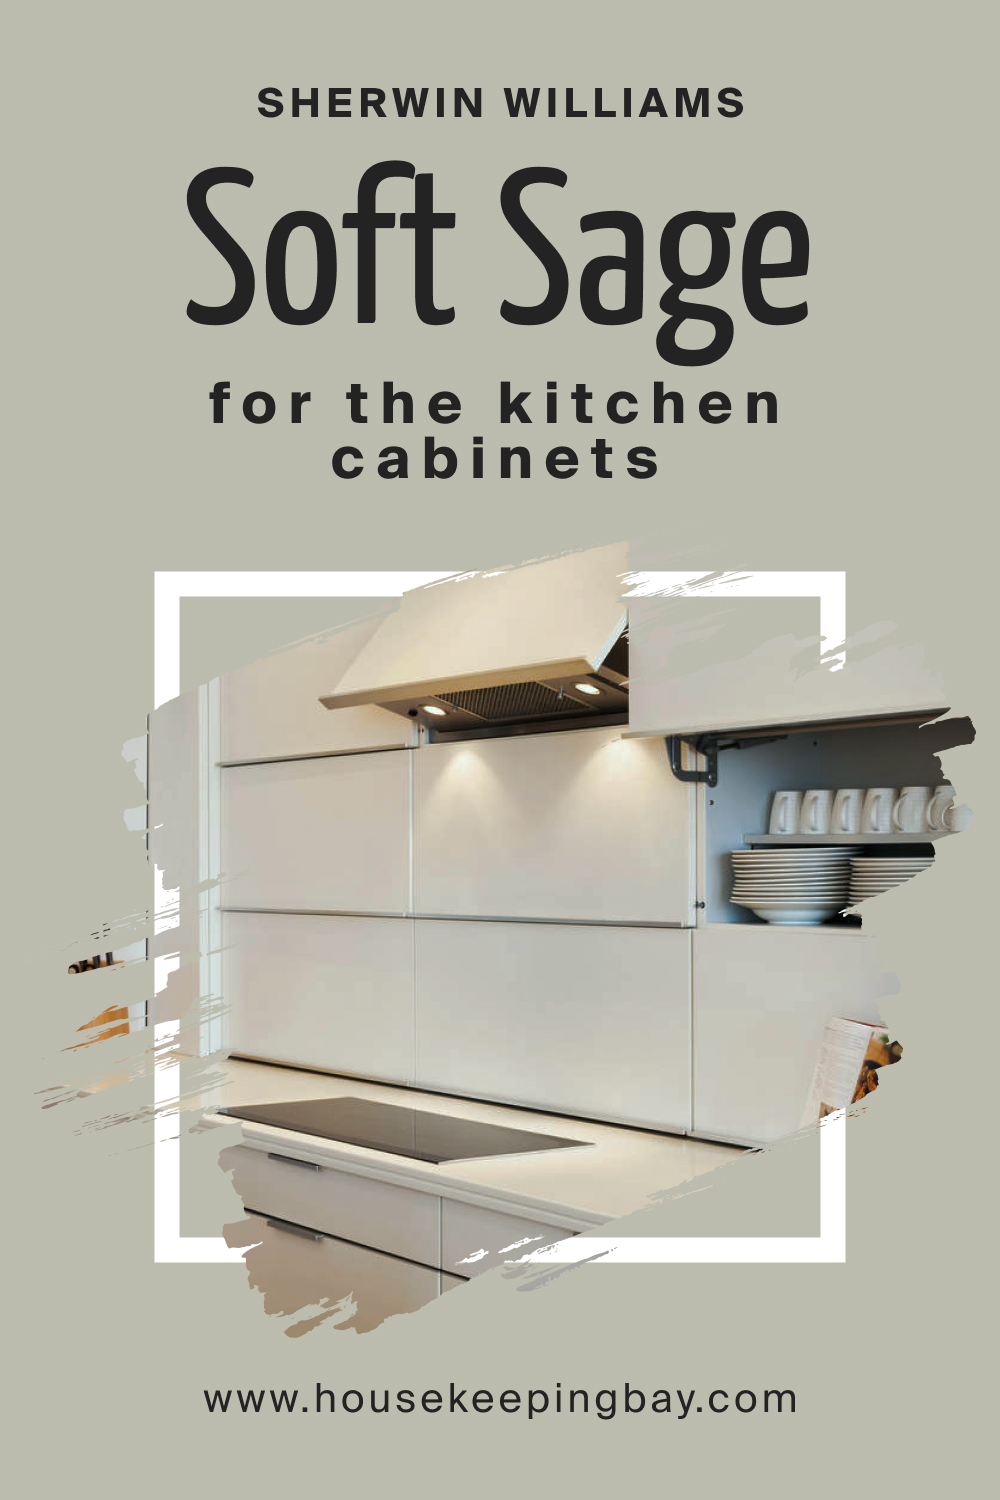 Sherwin Williams. SW 9647 Soft Sage For the Kitchen Cabinets